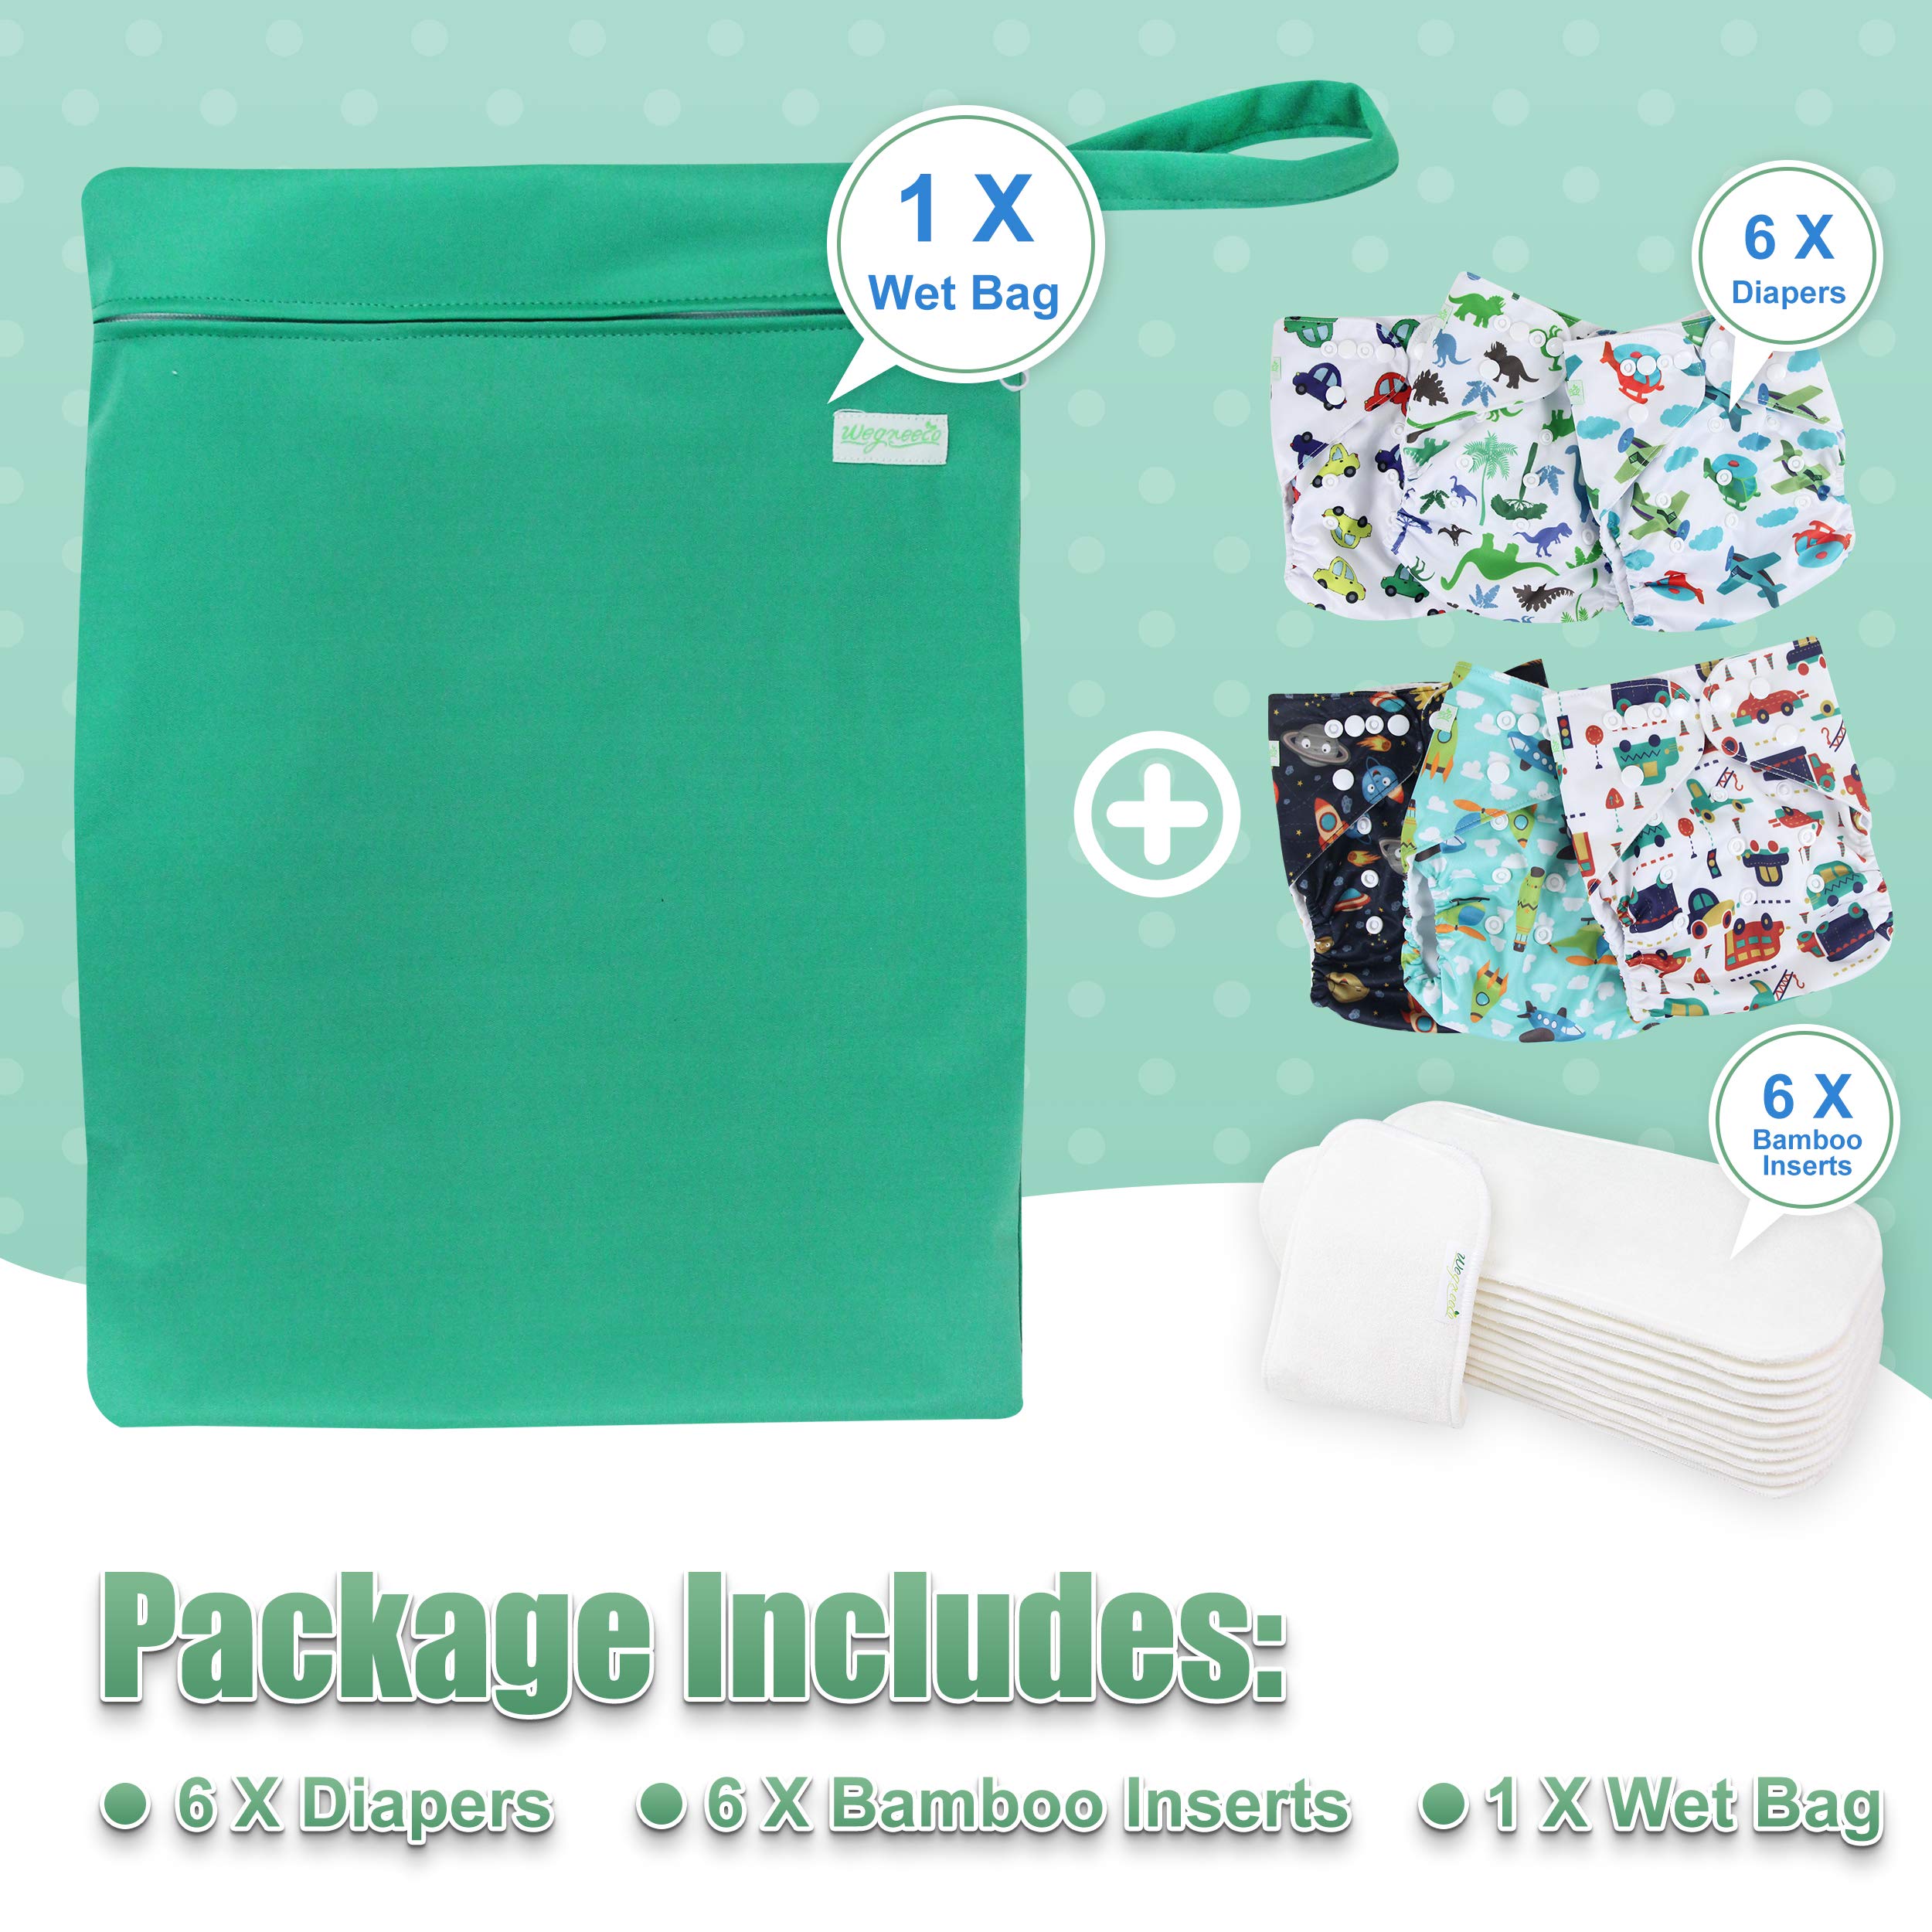 Wegreeco Washable Reusable Baby Cloth Pocket Diapers 6 Pack + 6 Bamboo Inserts (with 1 Wet Bag, Car, Airplane)